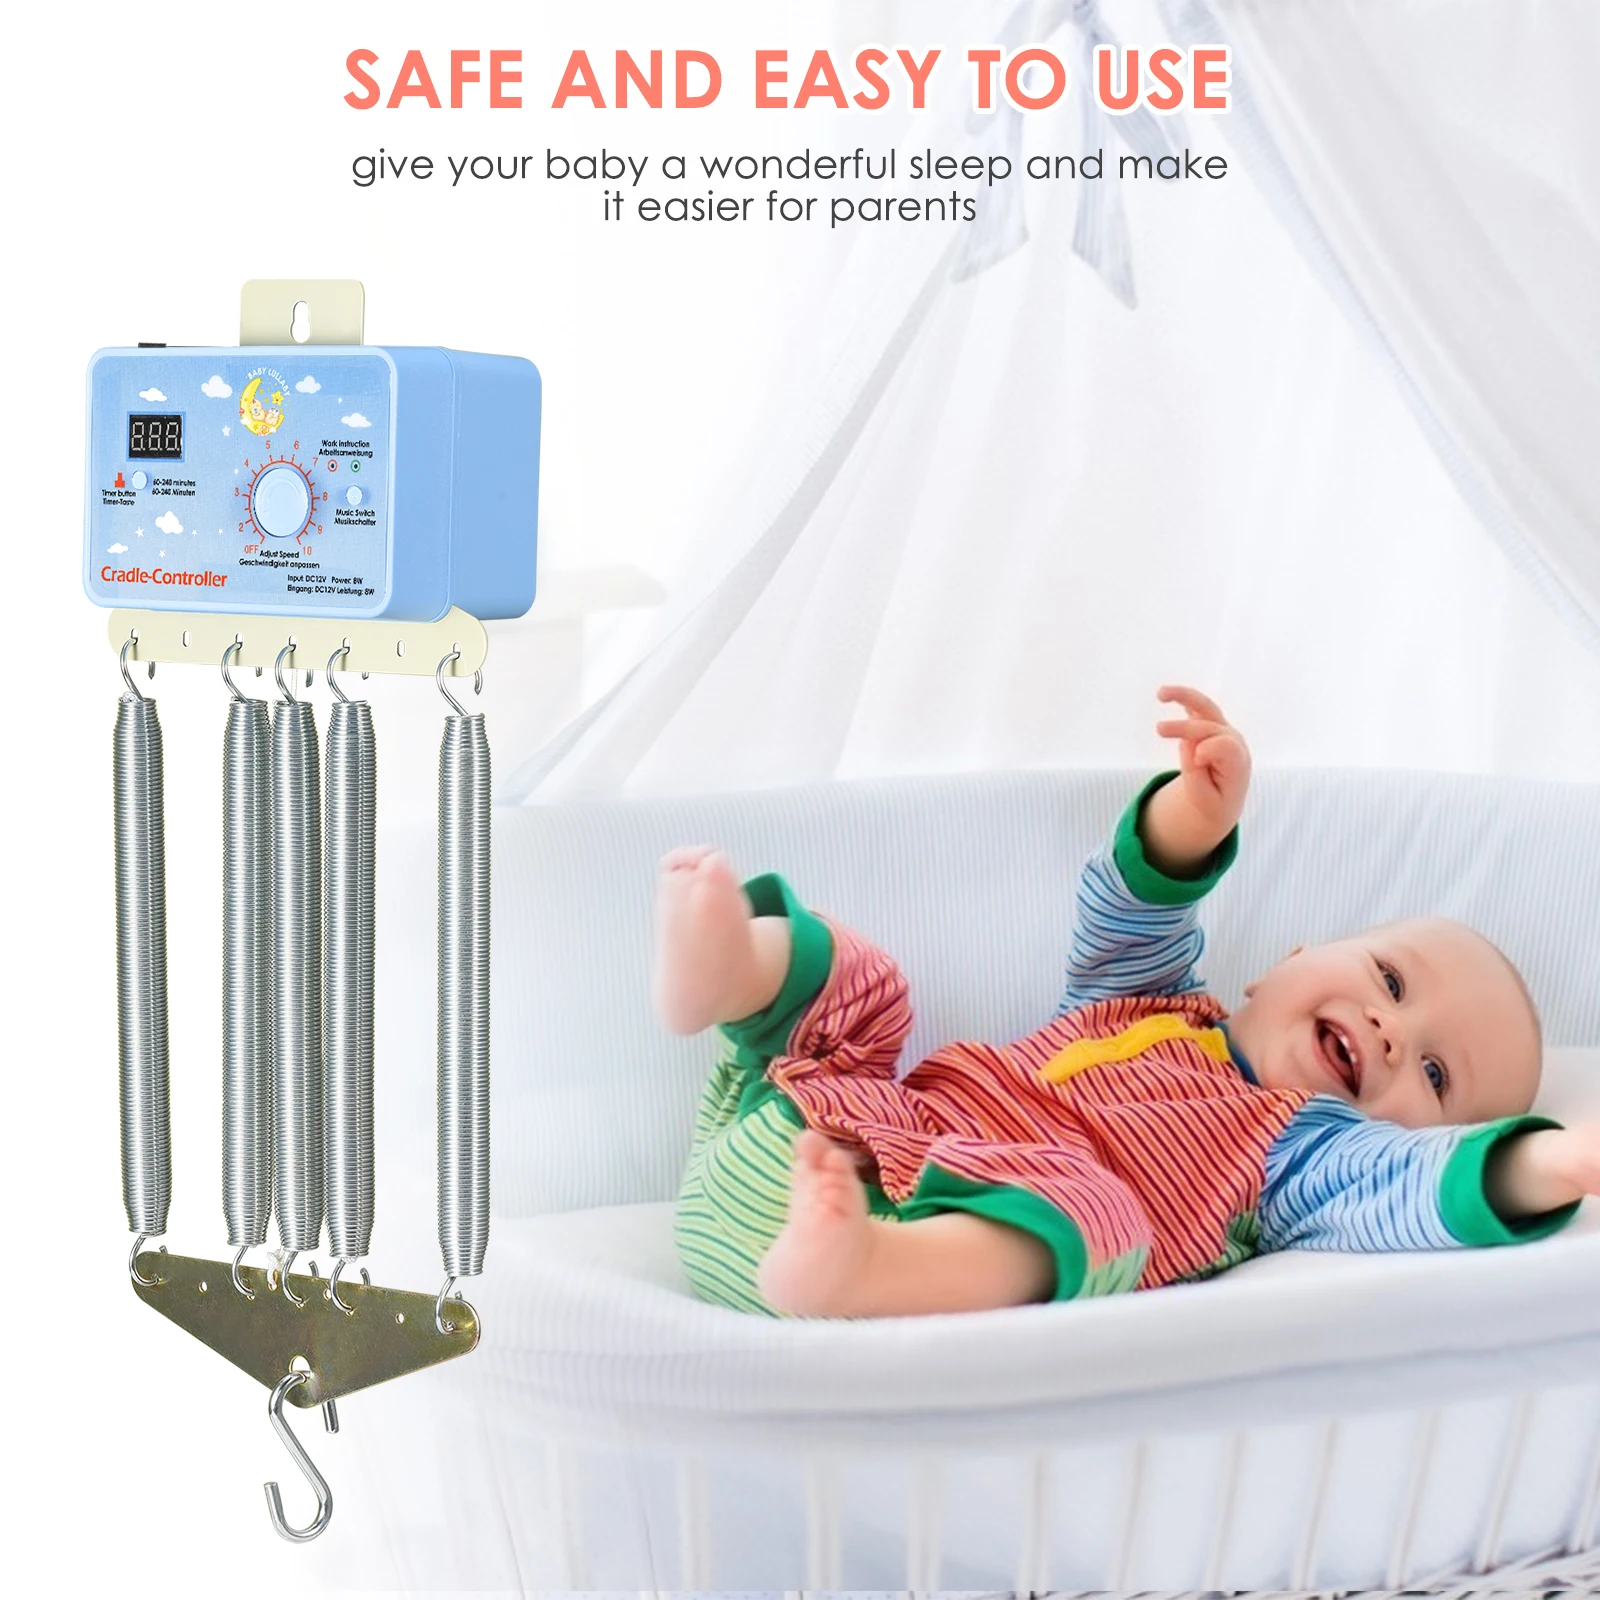 

Electric Baby Swing Cradle And Hammock Controller,Hanging Electric Cradle Control With Adjustable Timer Swing Spring,Up To 19 Kg